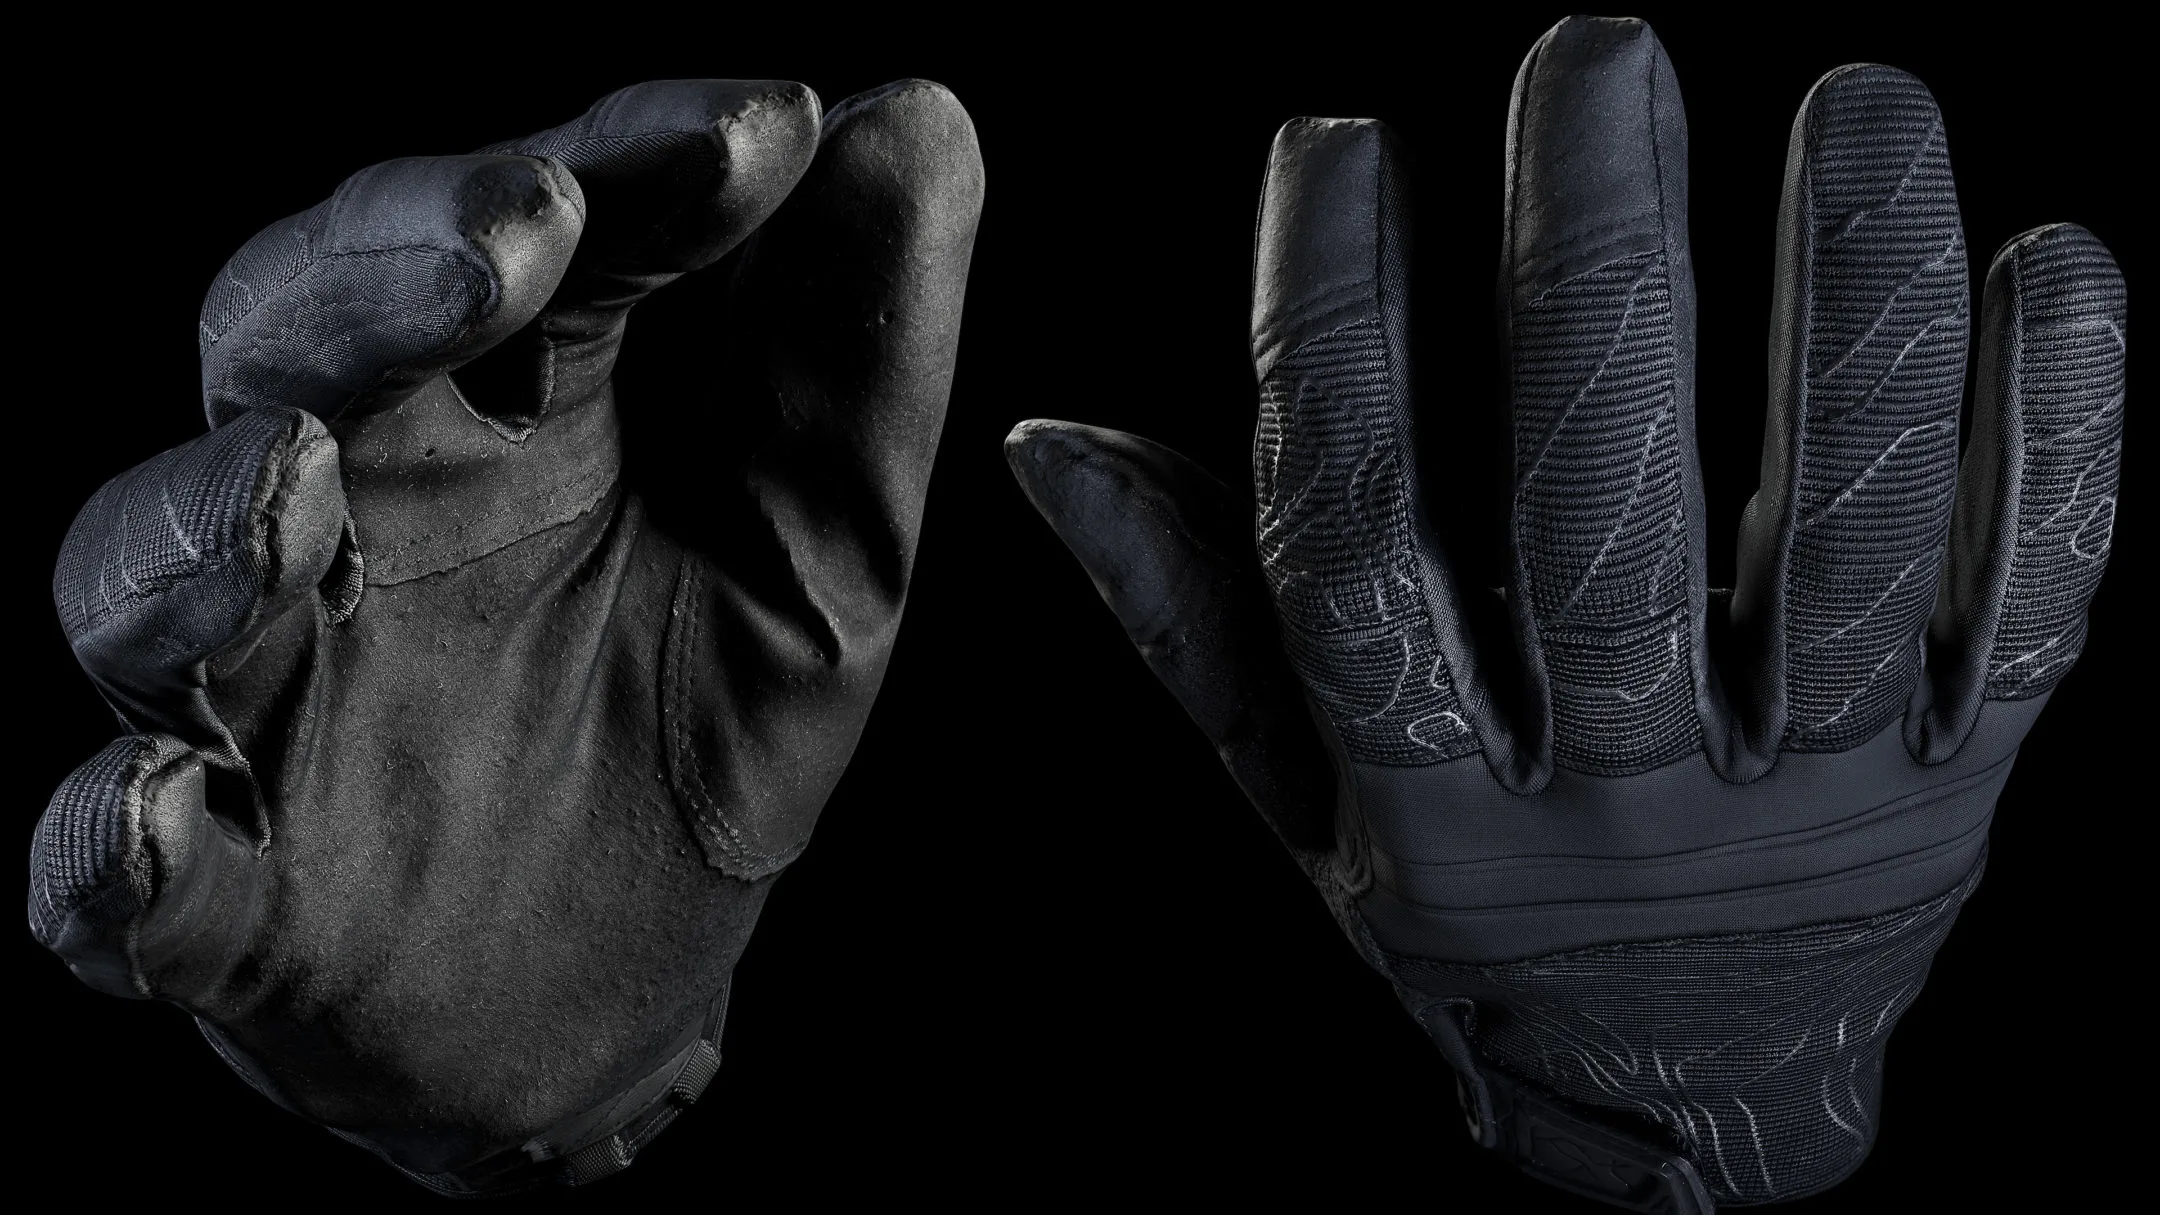 Tactical Gloves 038